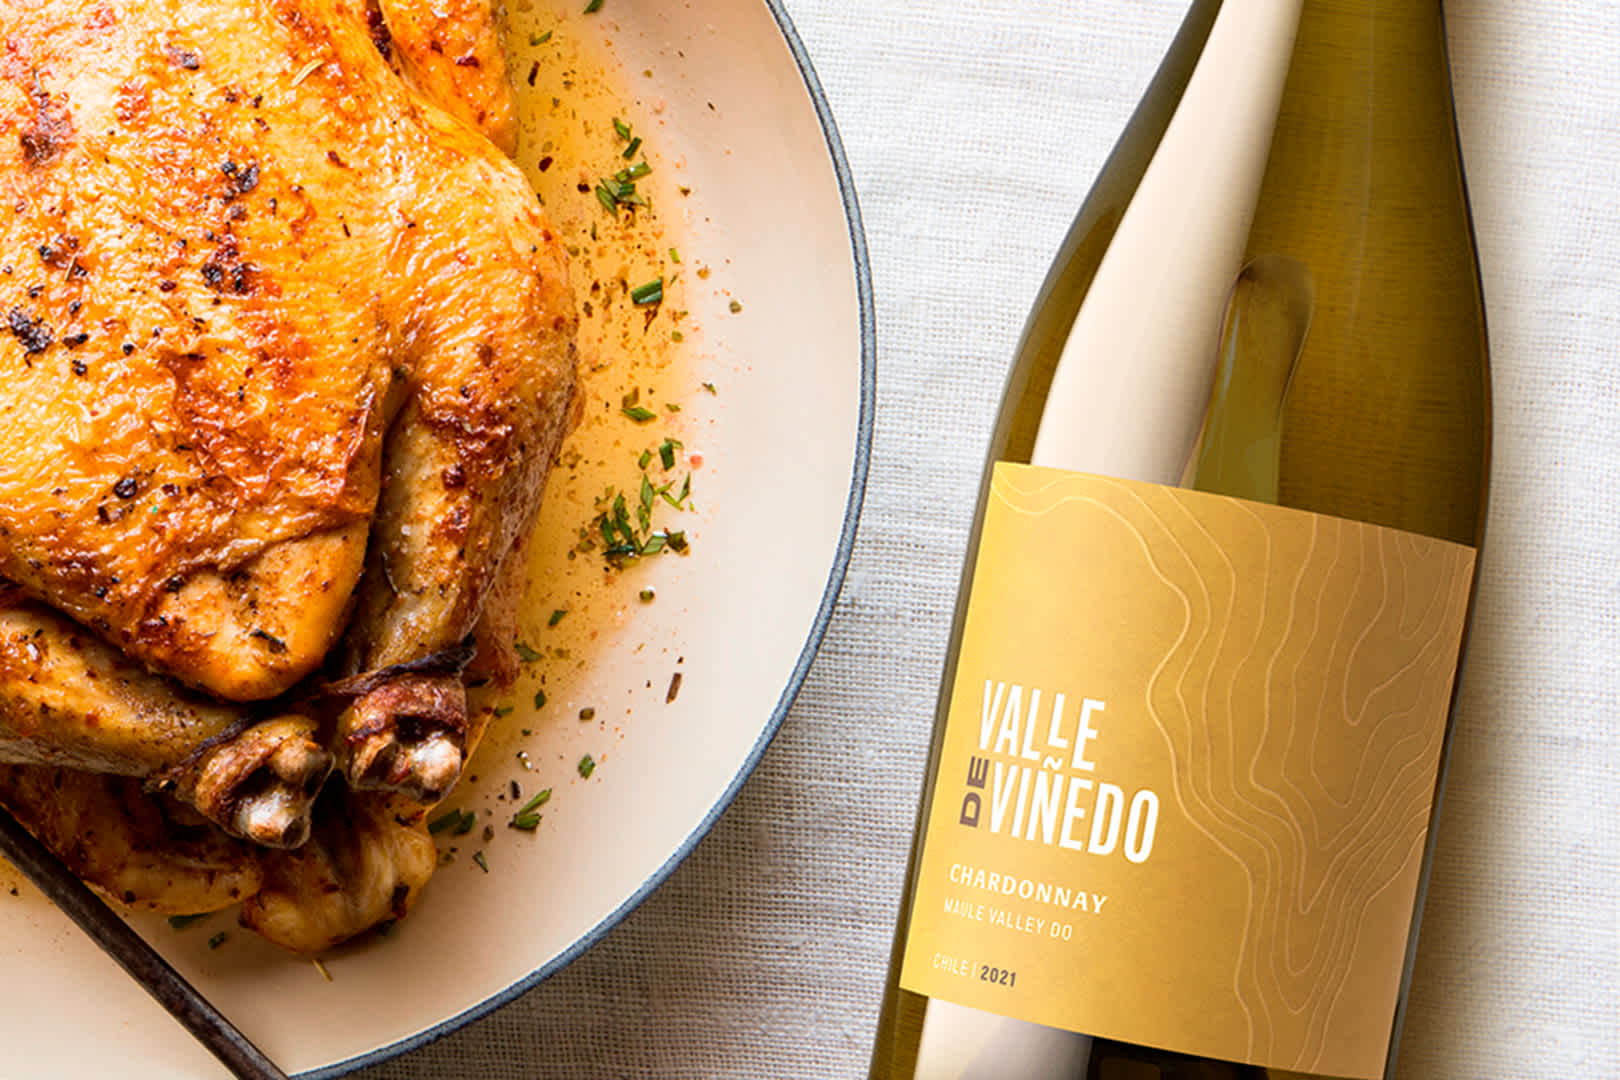 Pair roasted chicken with fruit-forward white wines like our bright and zesty Valle de Viñedo Chardonnay